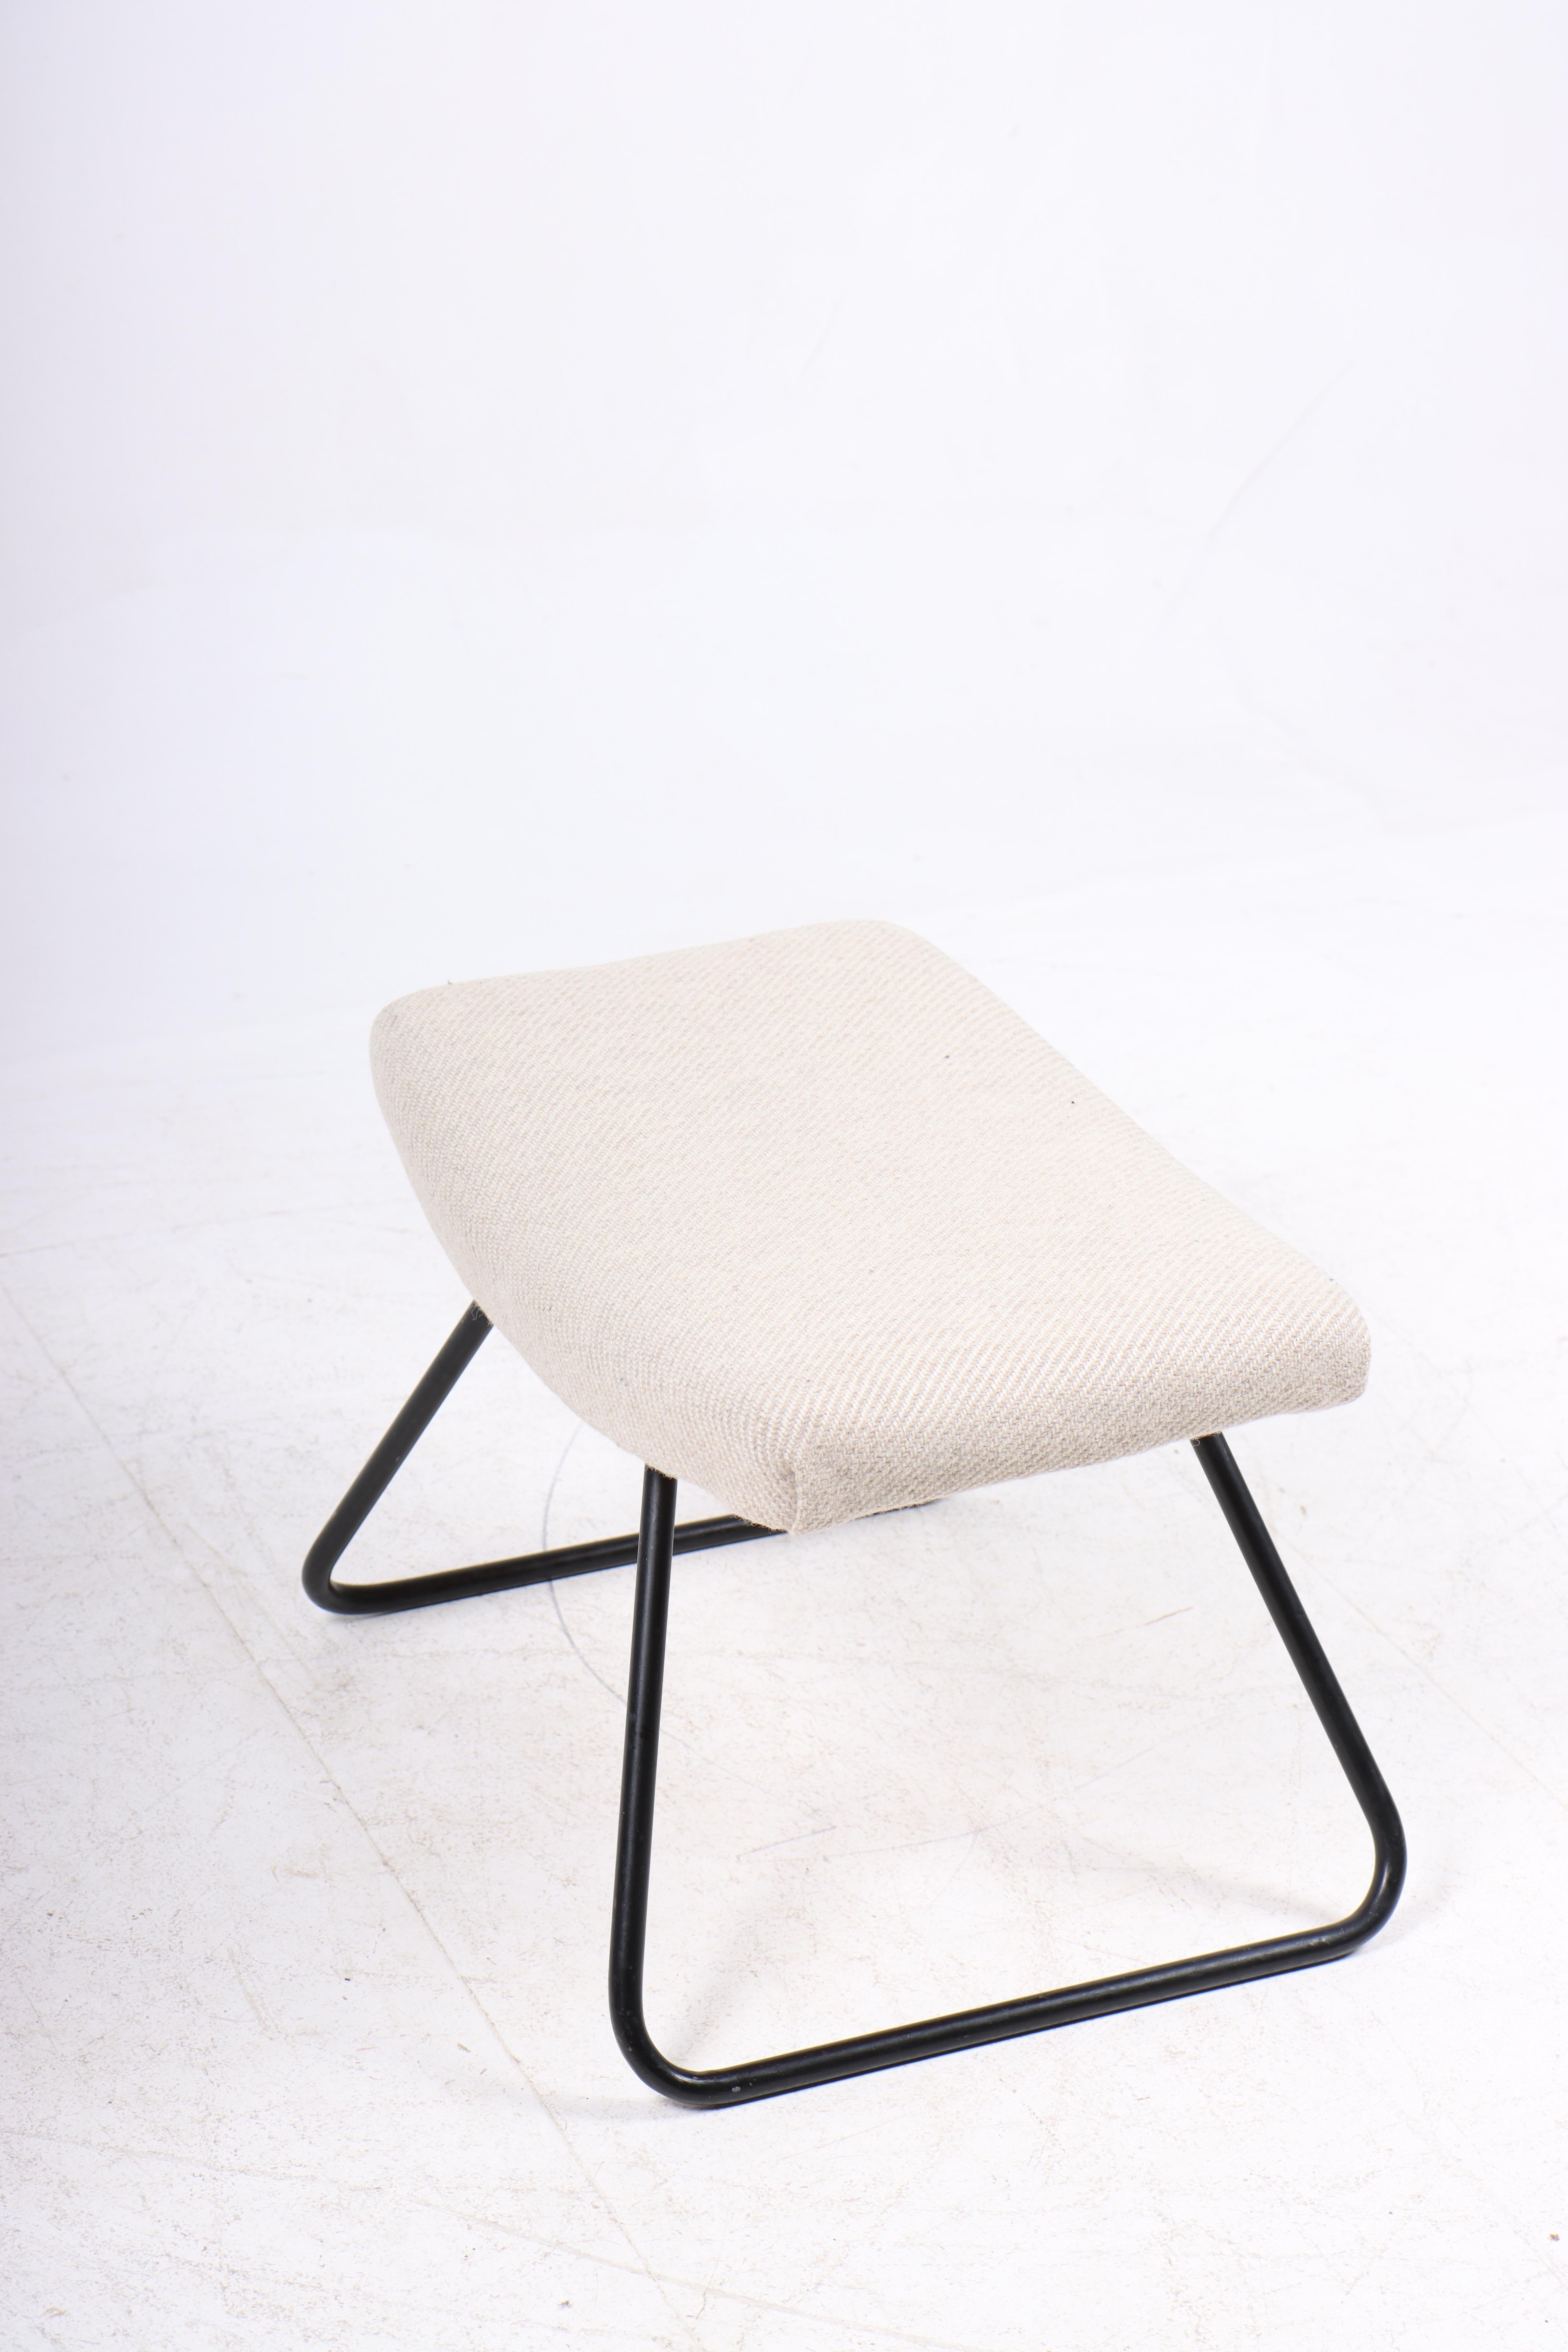 Midcentury Stool with Fabric, Made in Denmark 1960s In Good Condition For Sale In Lejre, DK